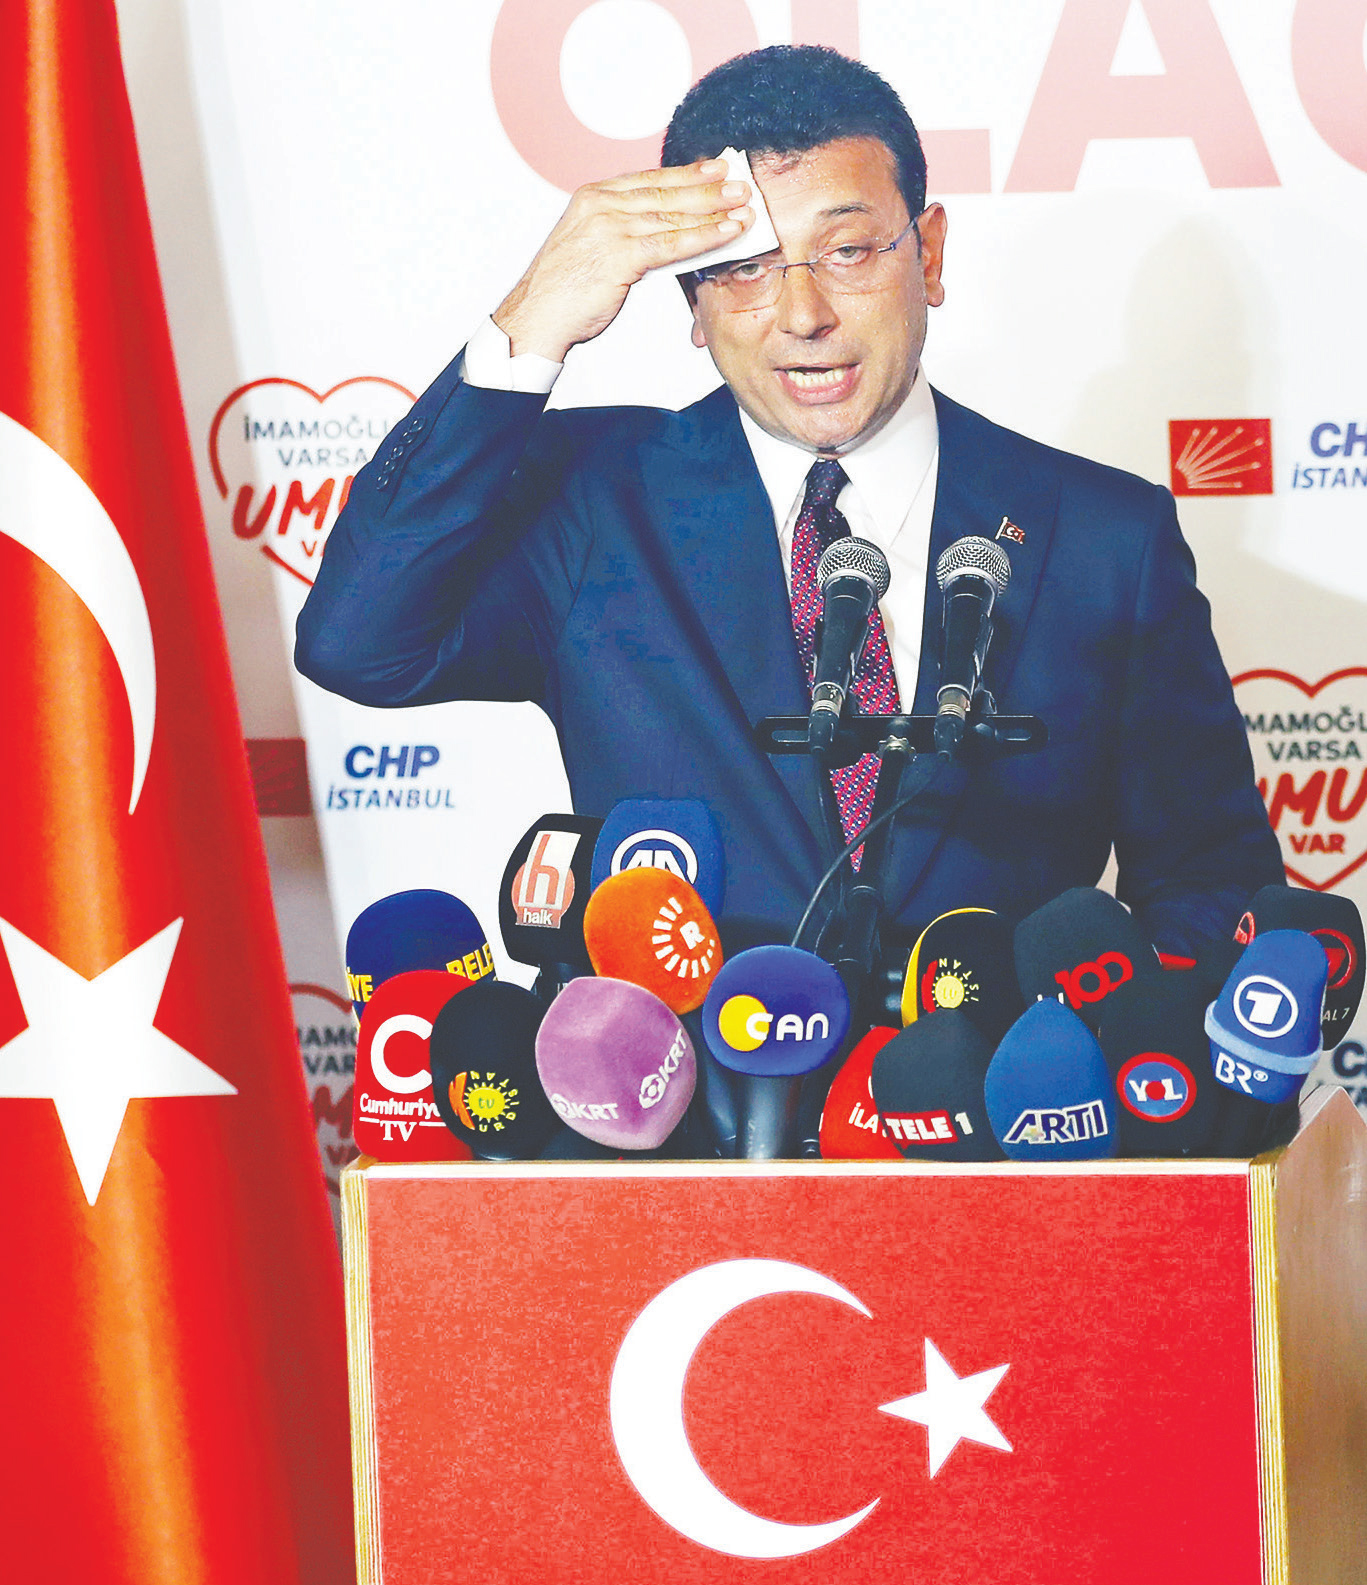 The voters in Turkey’s largest city rallied their support behind opposition Nation Alliance candidate Republican People’s Party’s (CHP) Ekrem Imamoğlu in the greatly anticipated Istanbul mayoral election rerun.